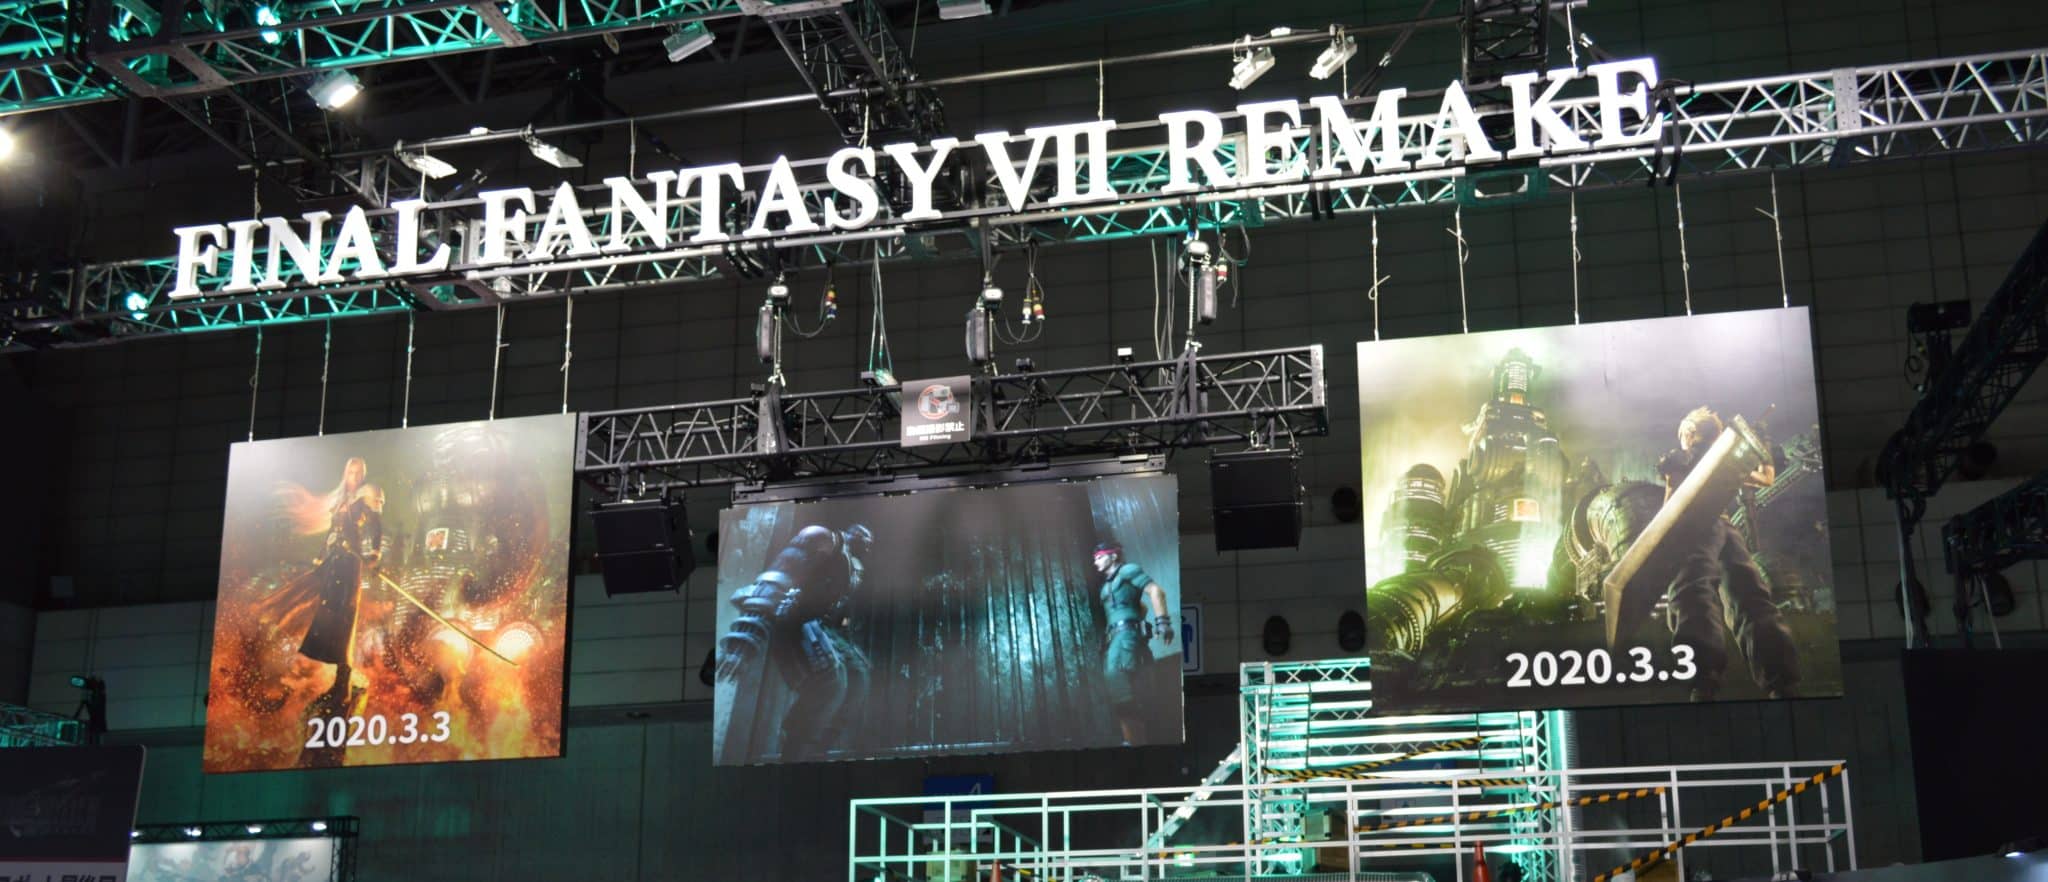 Final Fantasy VII Remake Demos Sold out by 12 pm at TGS 2019